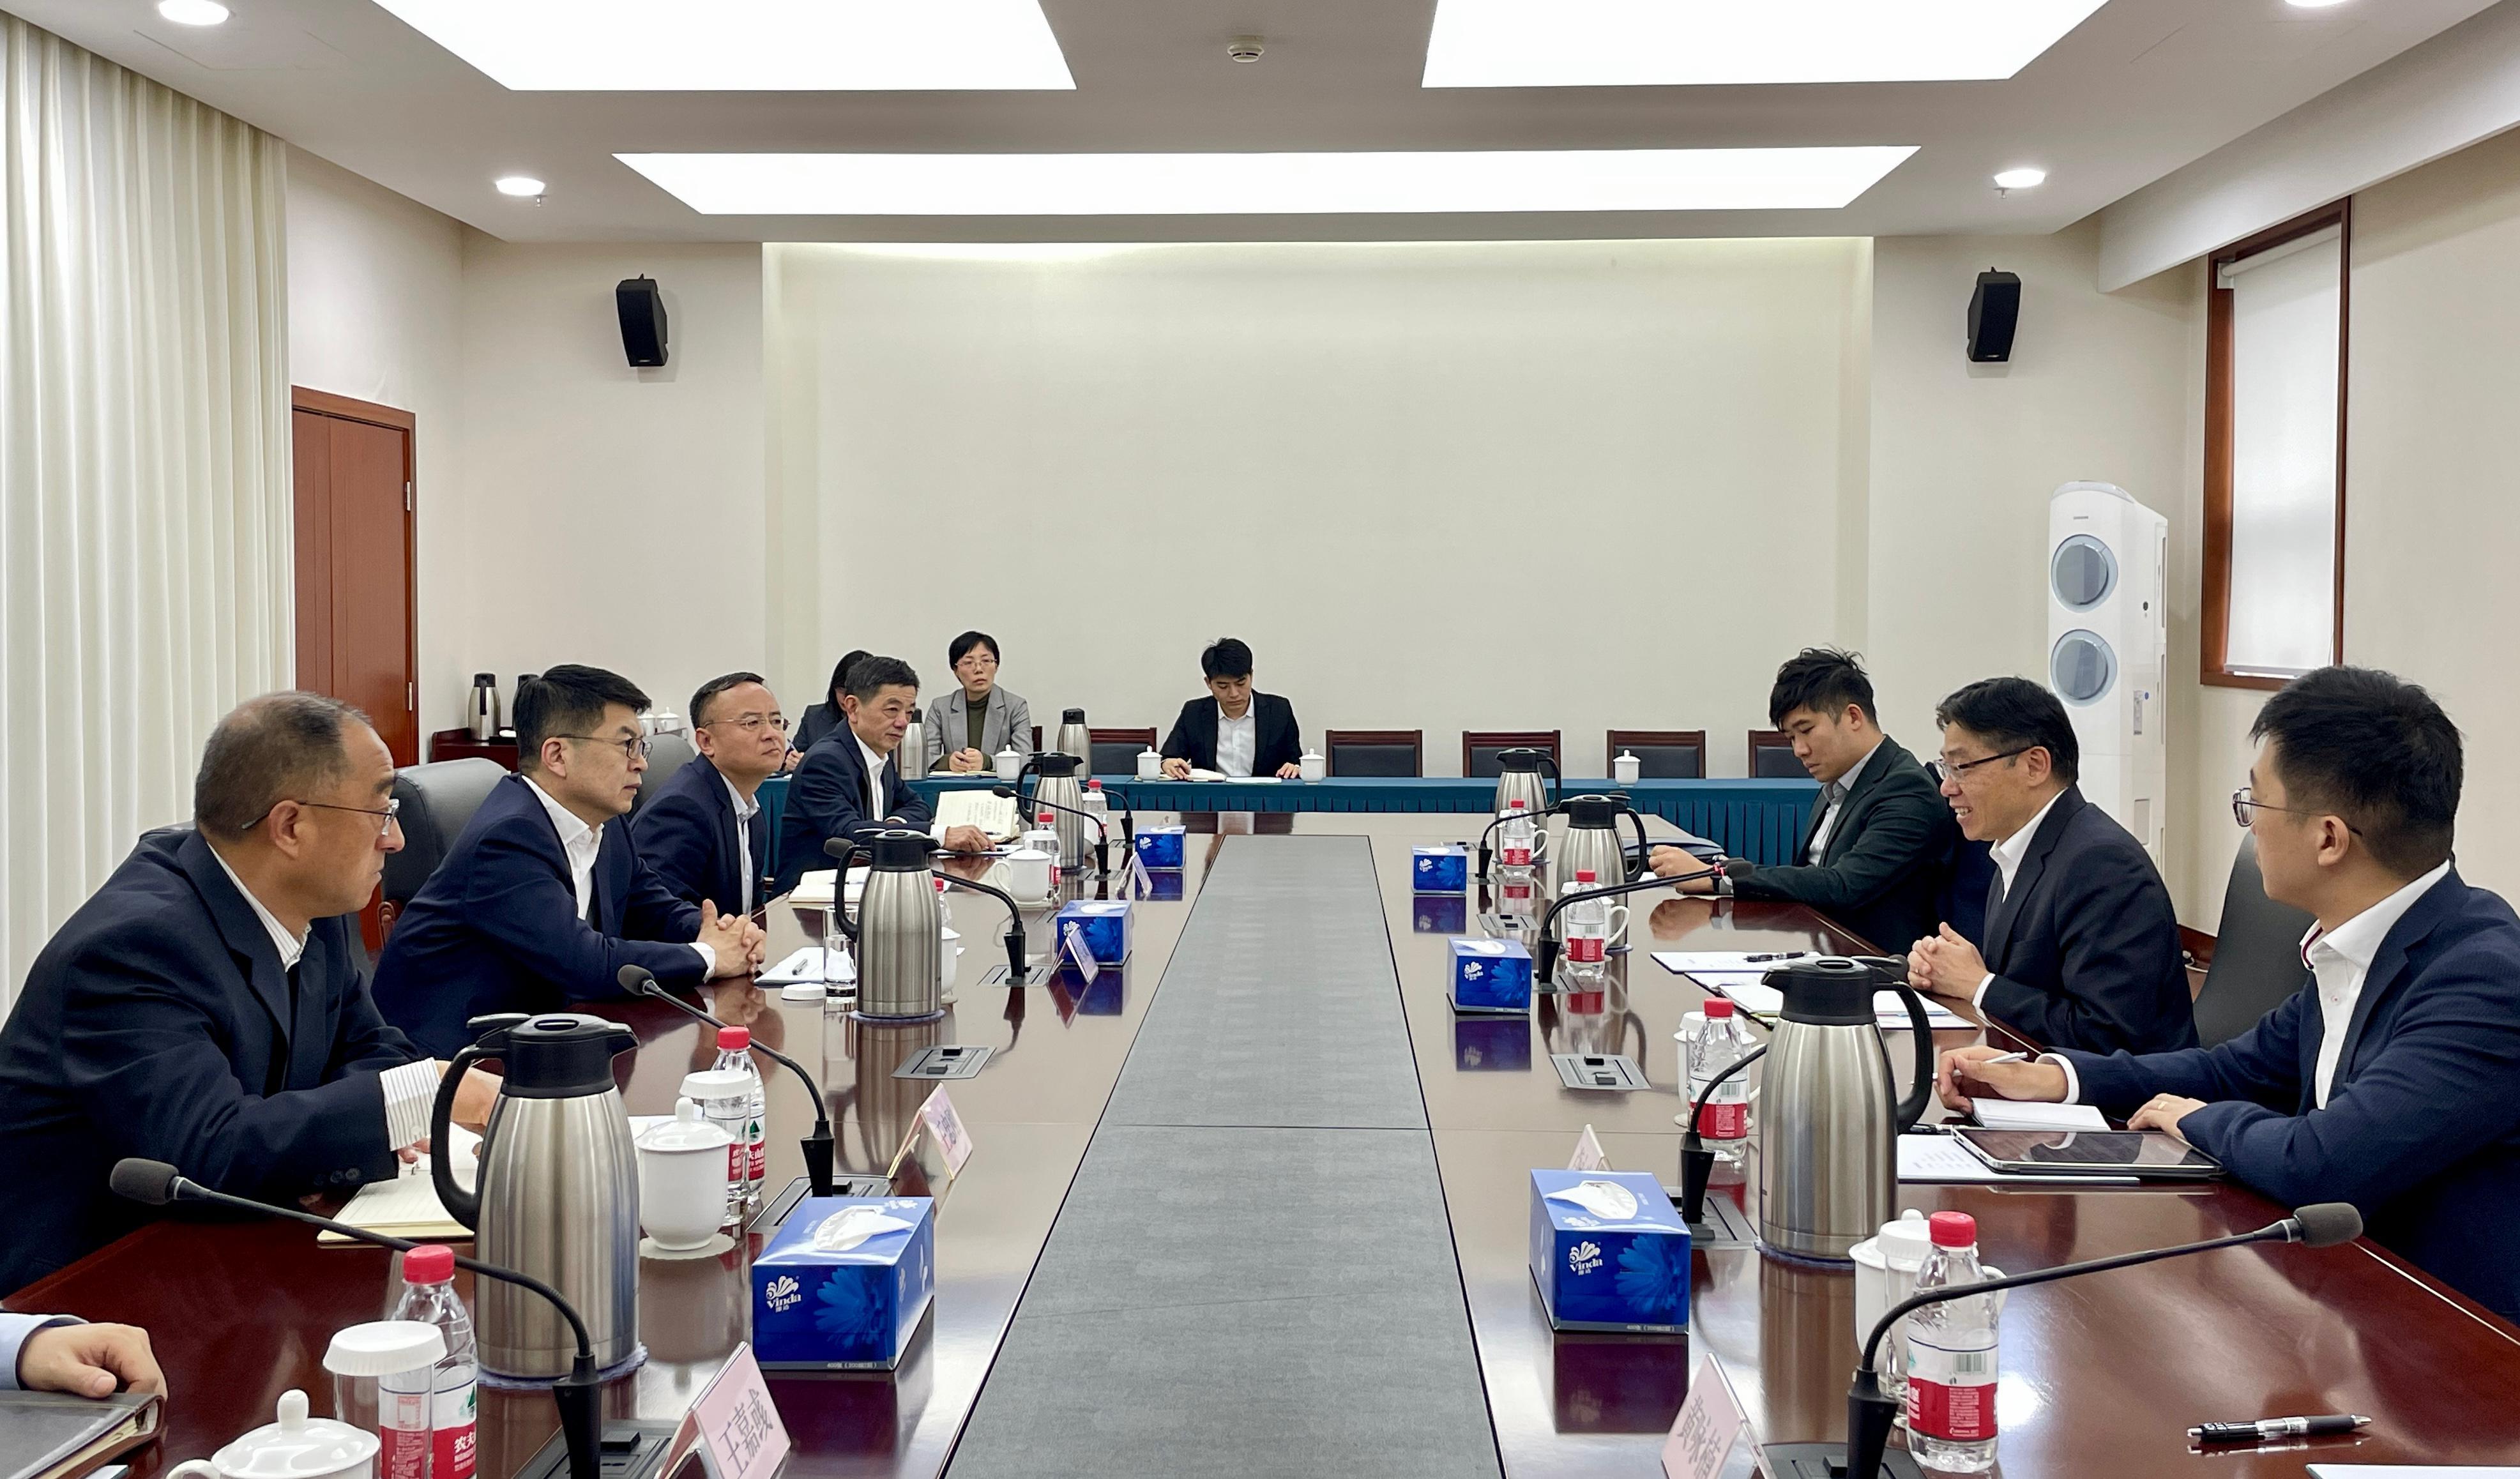 The Secretary for Transport and Logistics, Mr Lam Sai-hung (second right), meets with the Administrator of the National Railway Administration, Mr Fei Dongbin (second left), this afternoon (April 10), exploring various issues such as enhancement of high-speed rail services.